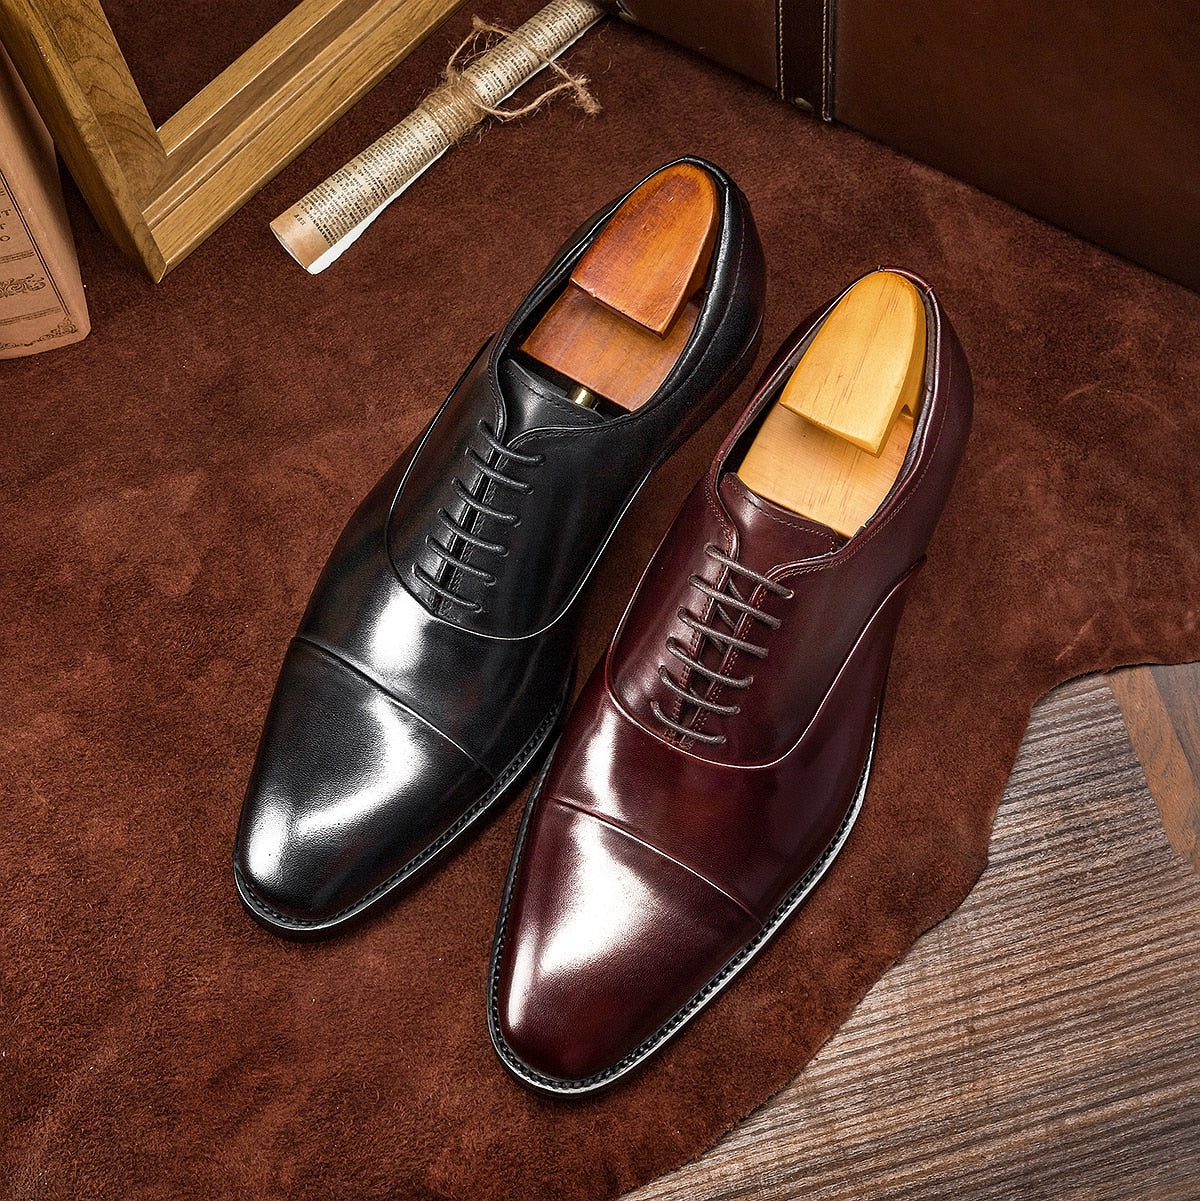 Men Dress Shoes Party / Office & Career / Wedding Lace-Up Oxford